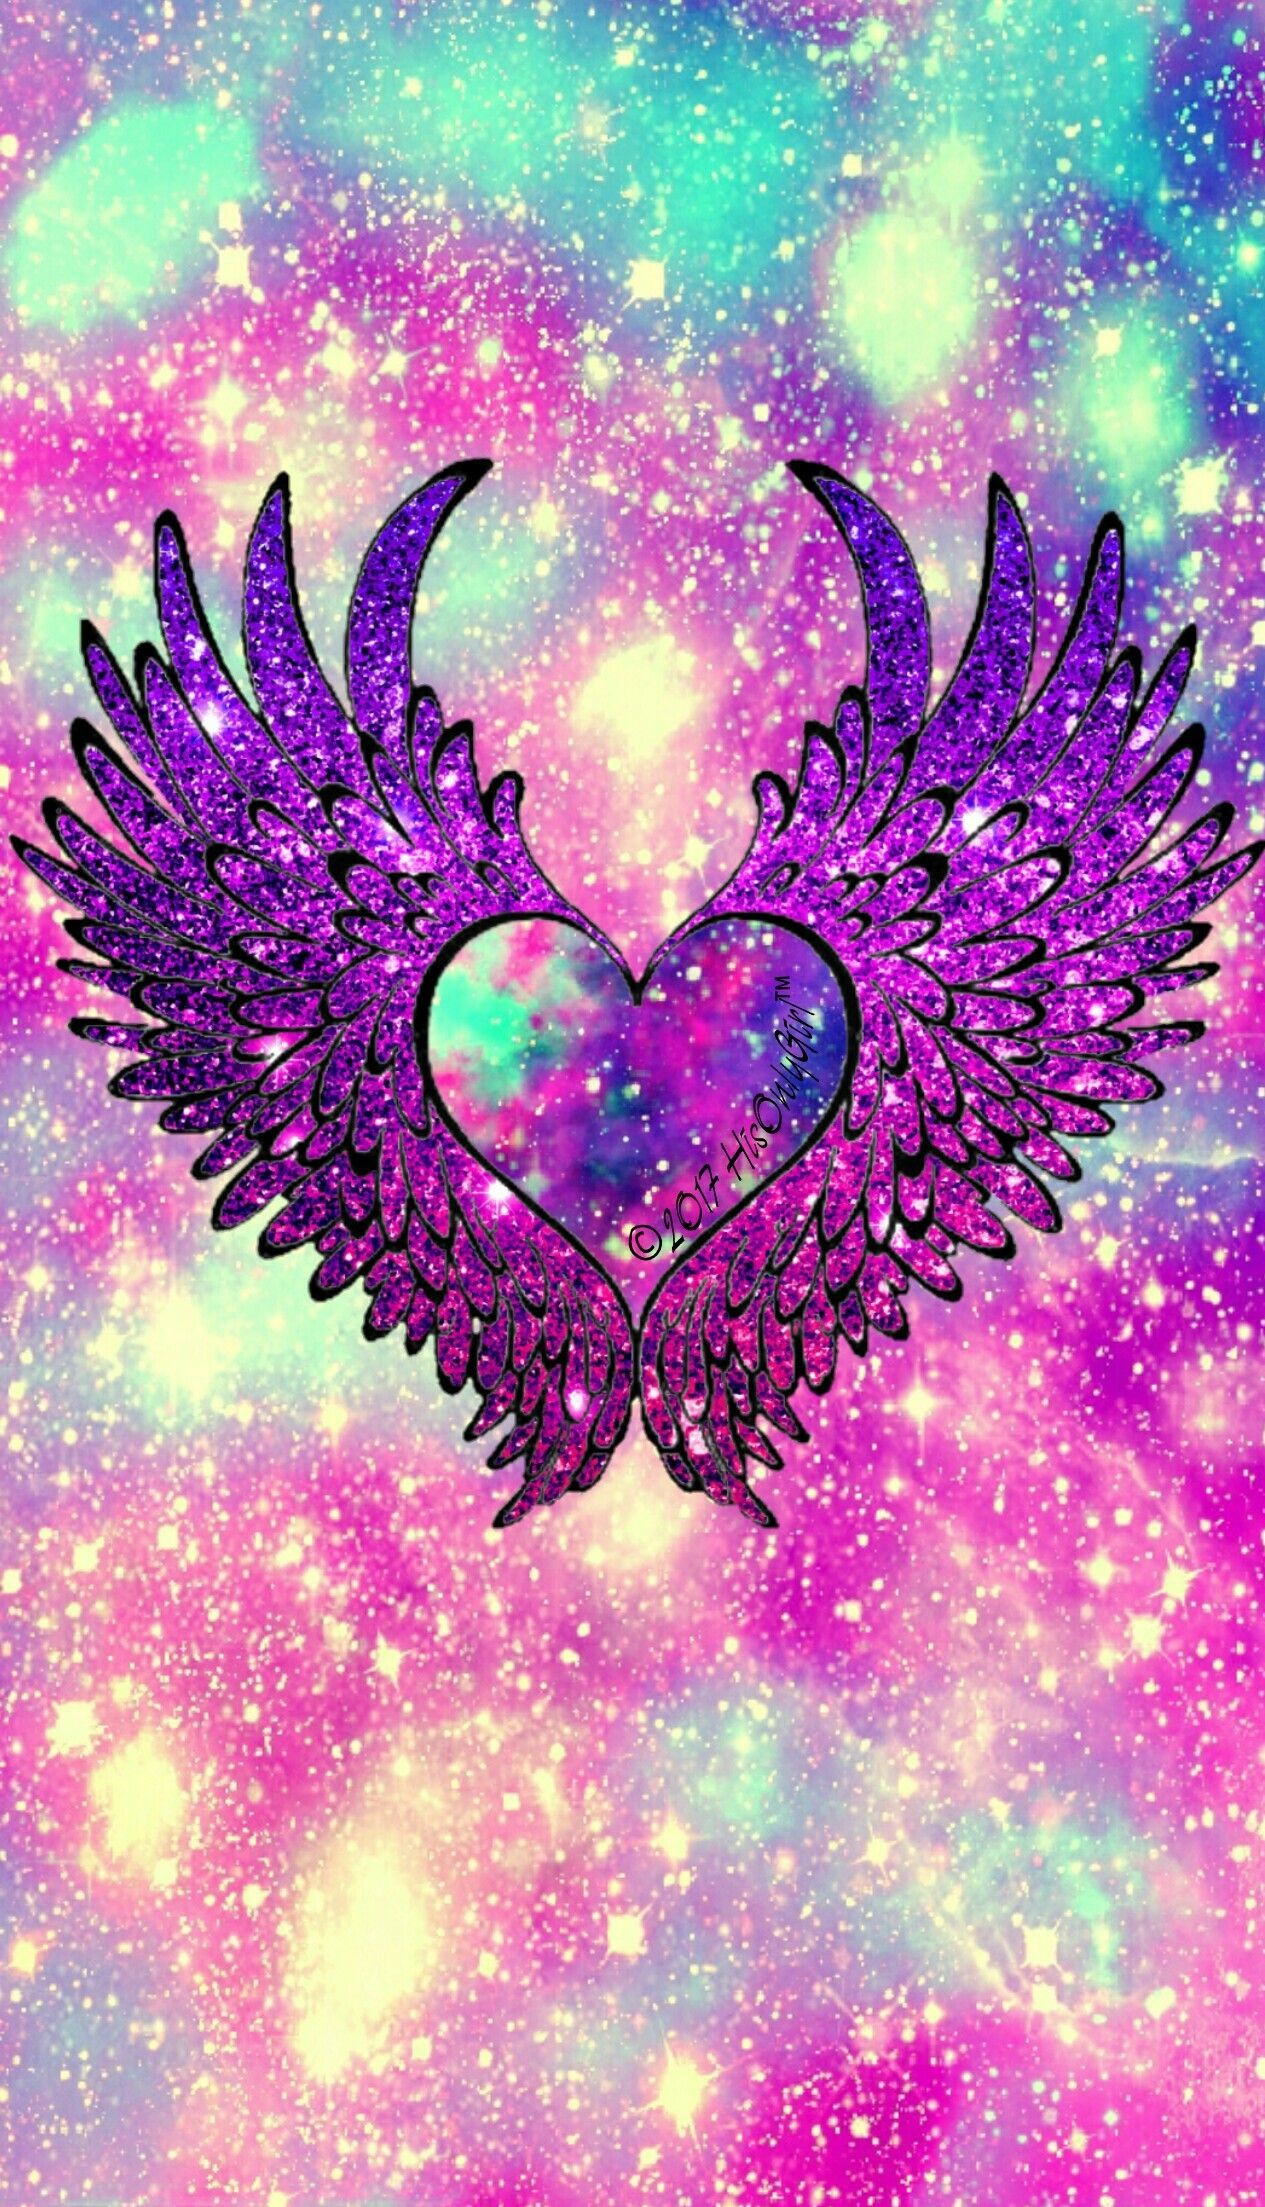 1265x2207 Angel heart wings galaxy wallpaper I created for the app CocoPPa!